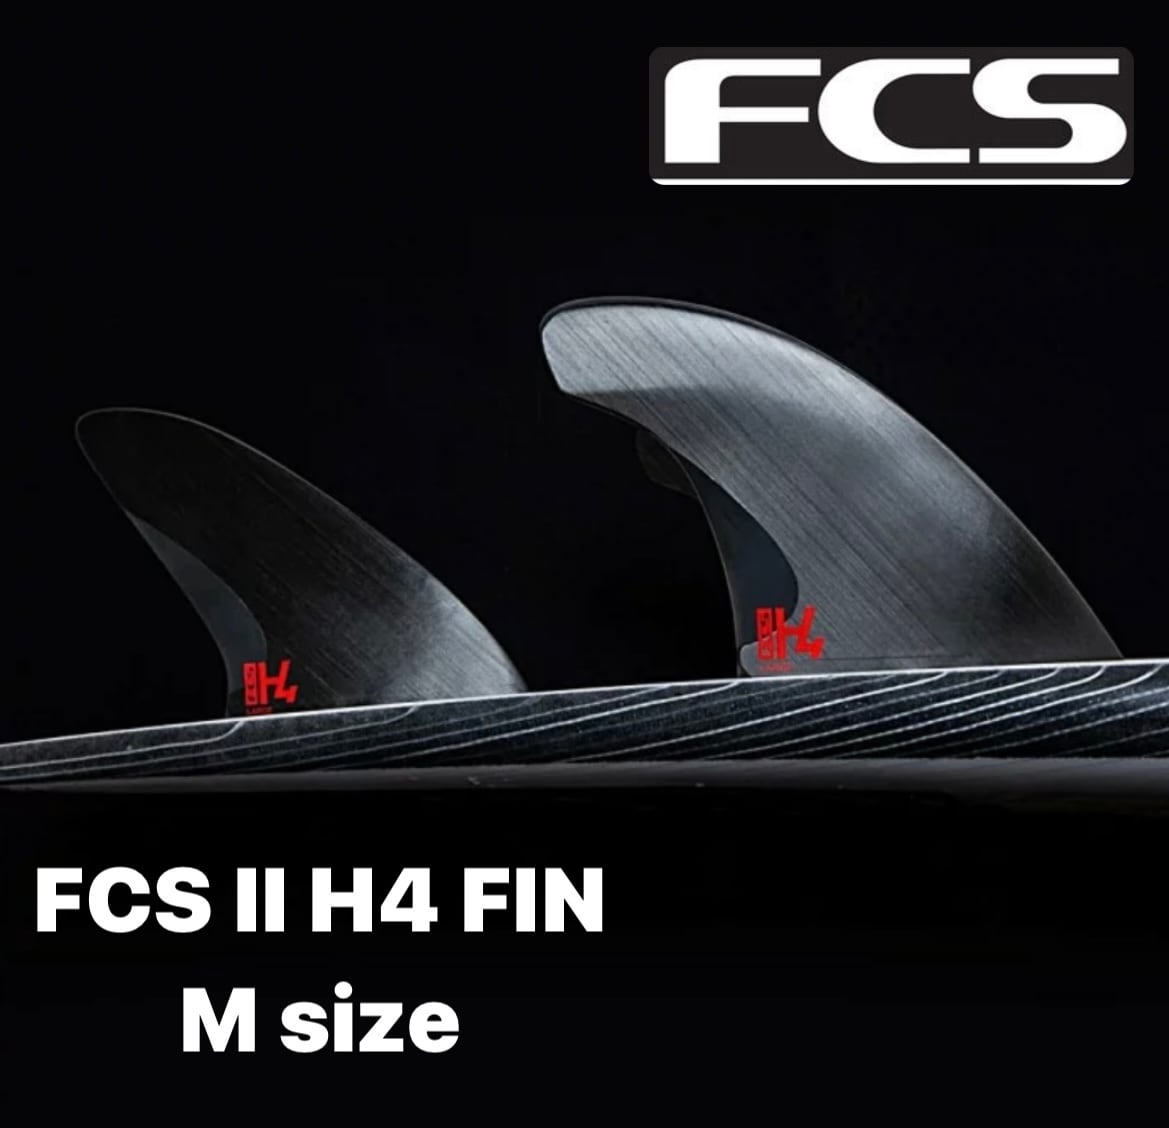 FCS2 H4 Fin Mサイズ | KAISERS SURF powered by BASE